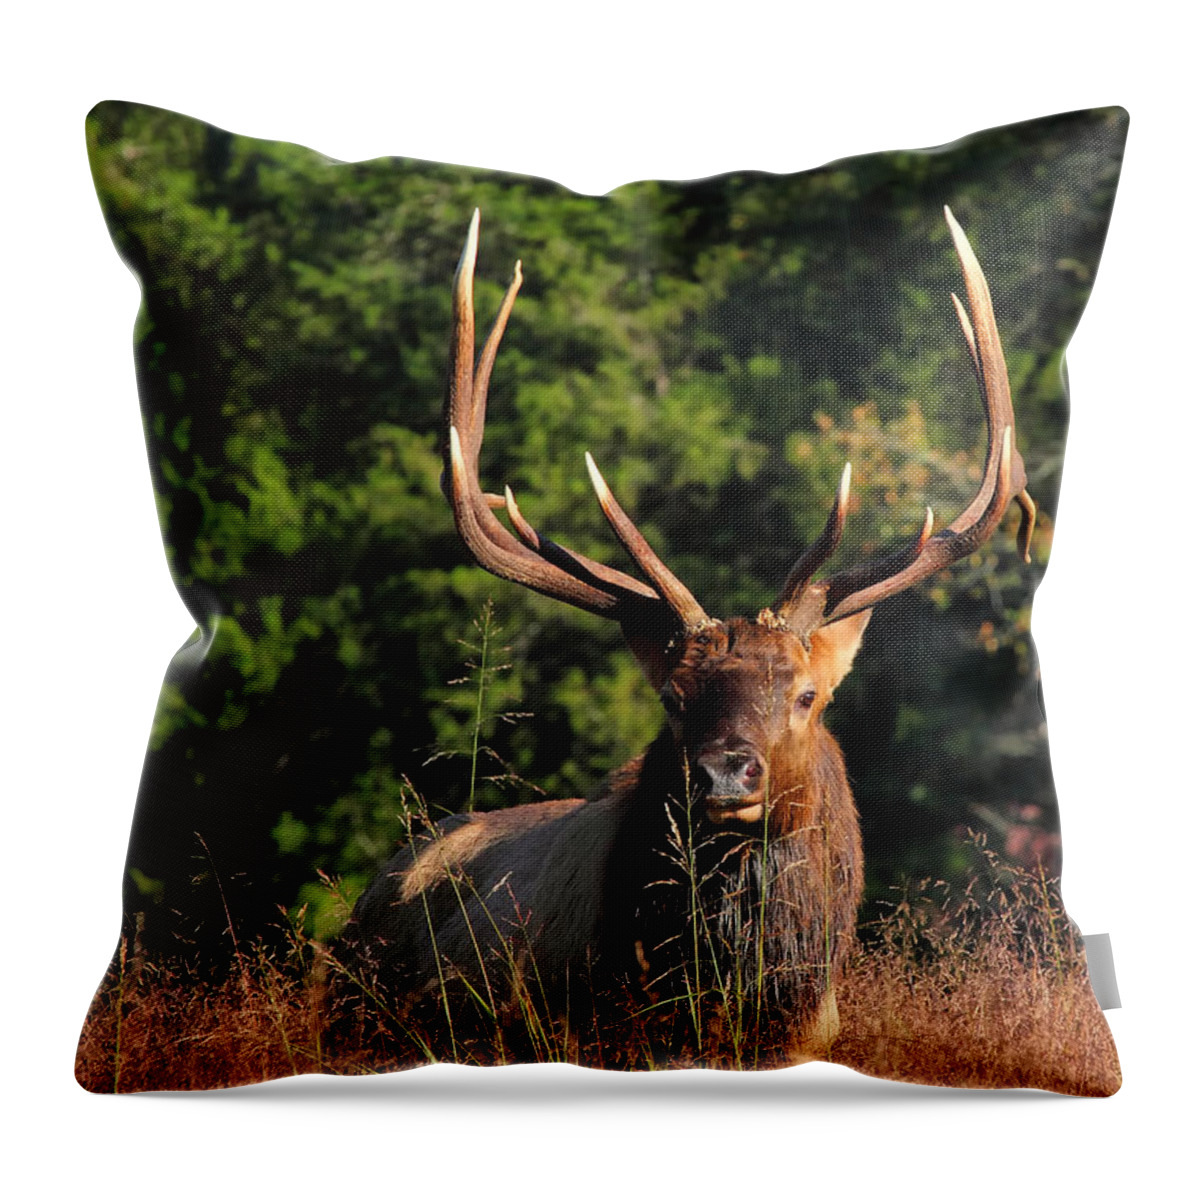 Big Bull Elk Throw Pillow featuring the photograph Big Bull Elk Up Close in Lost Valley by Michael Dougherty